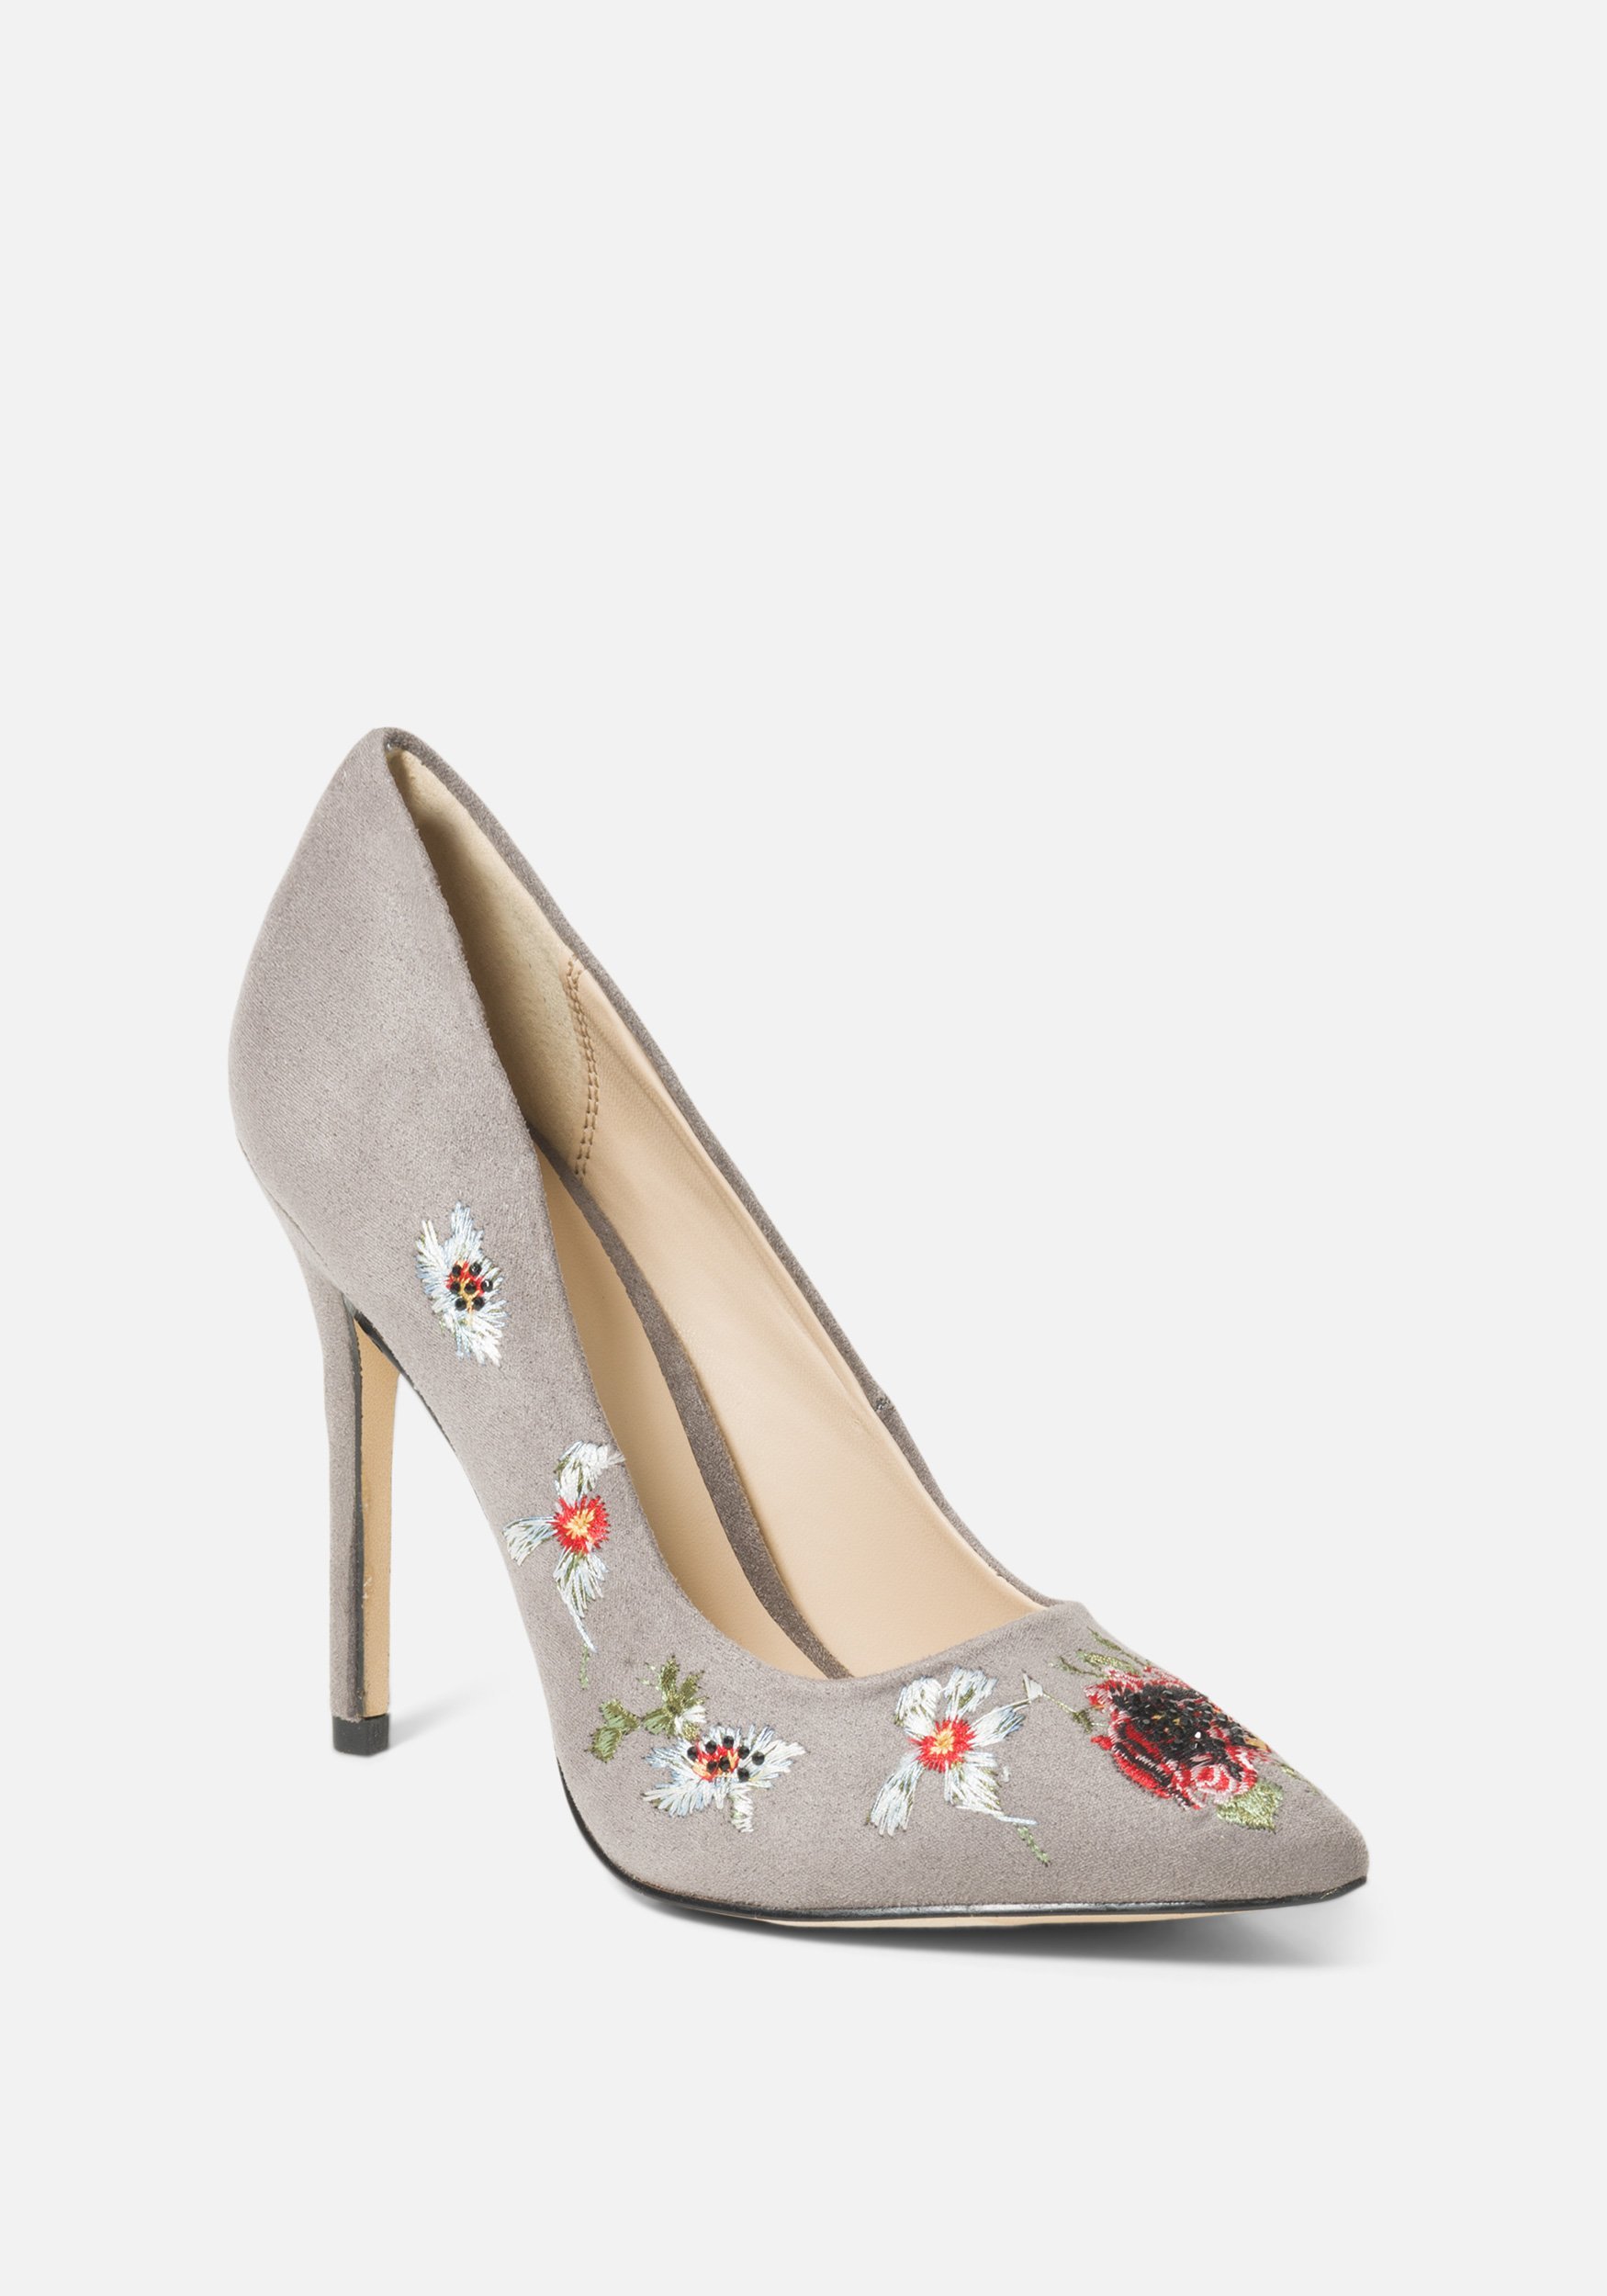 Bebe Women's Leyton Embroidery Pumps, Size 8.5 in Grey Synthetic